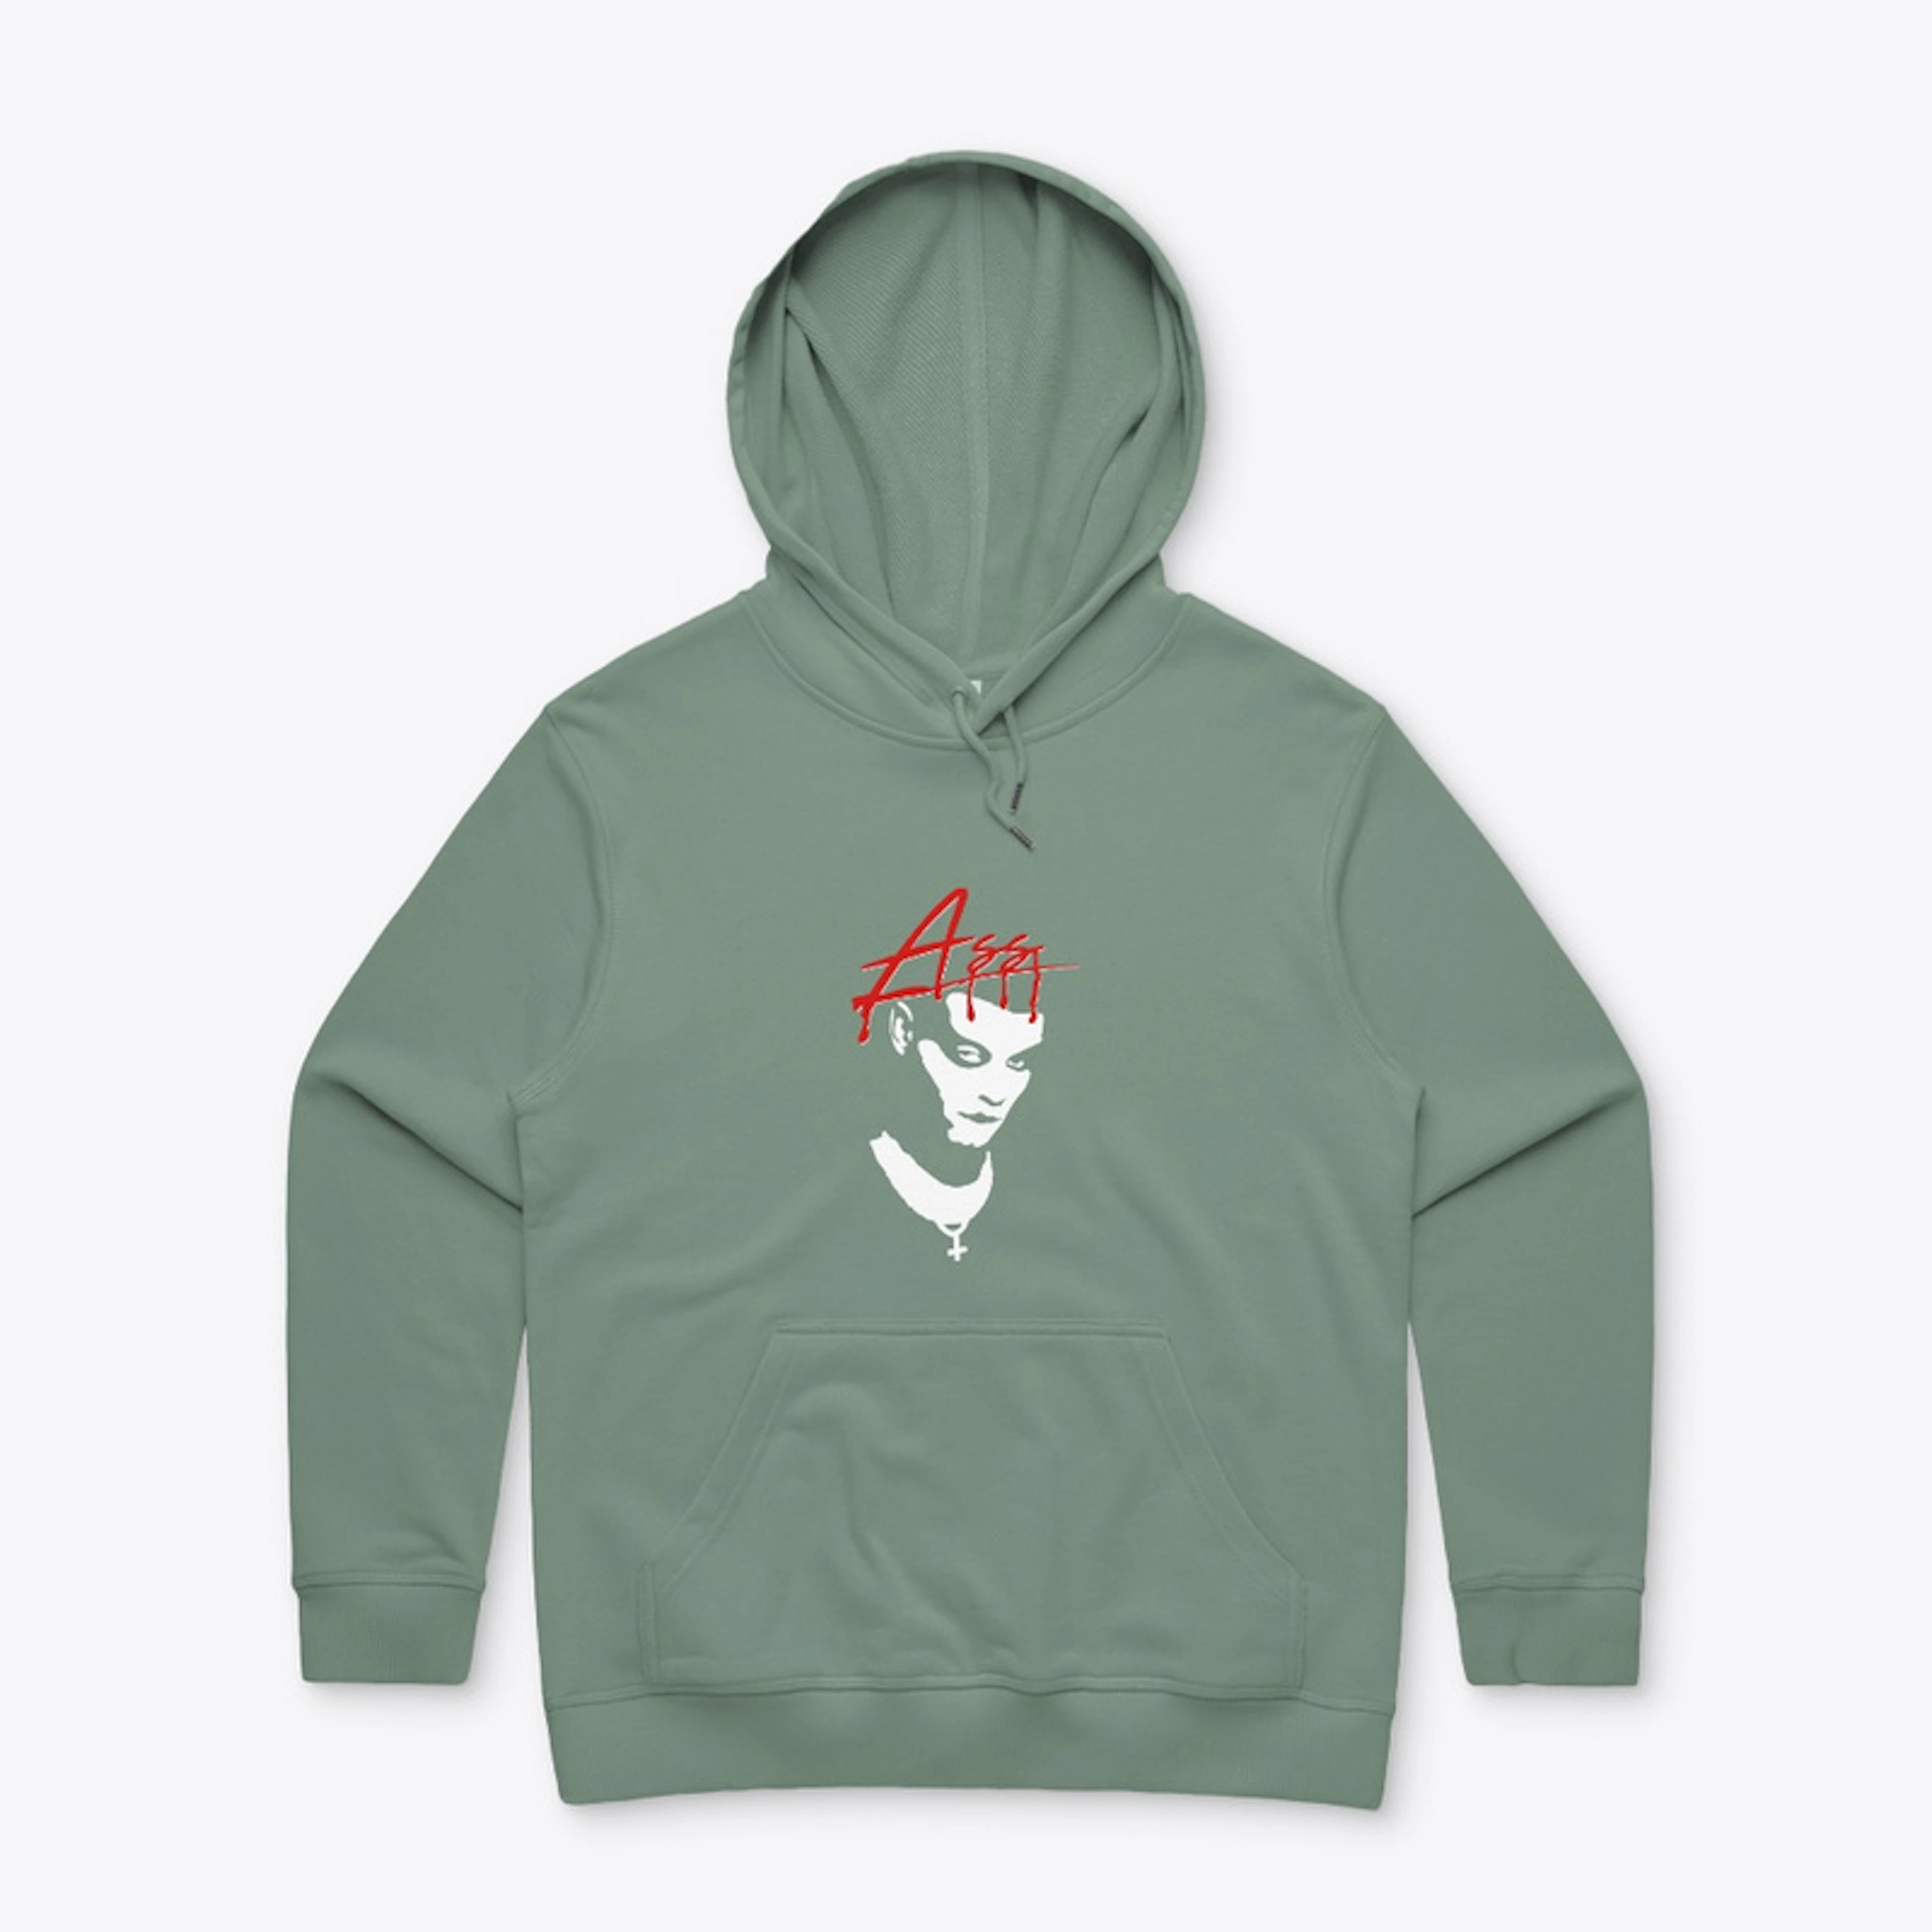 Limited Edition Merch